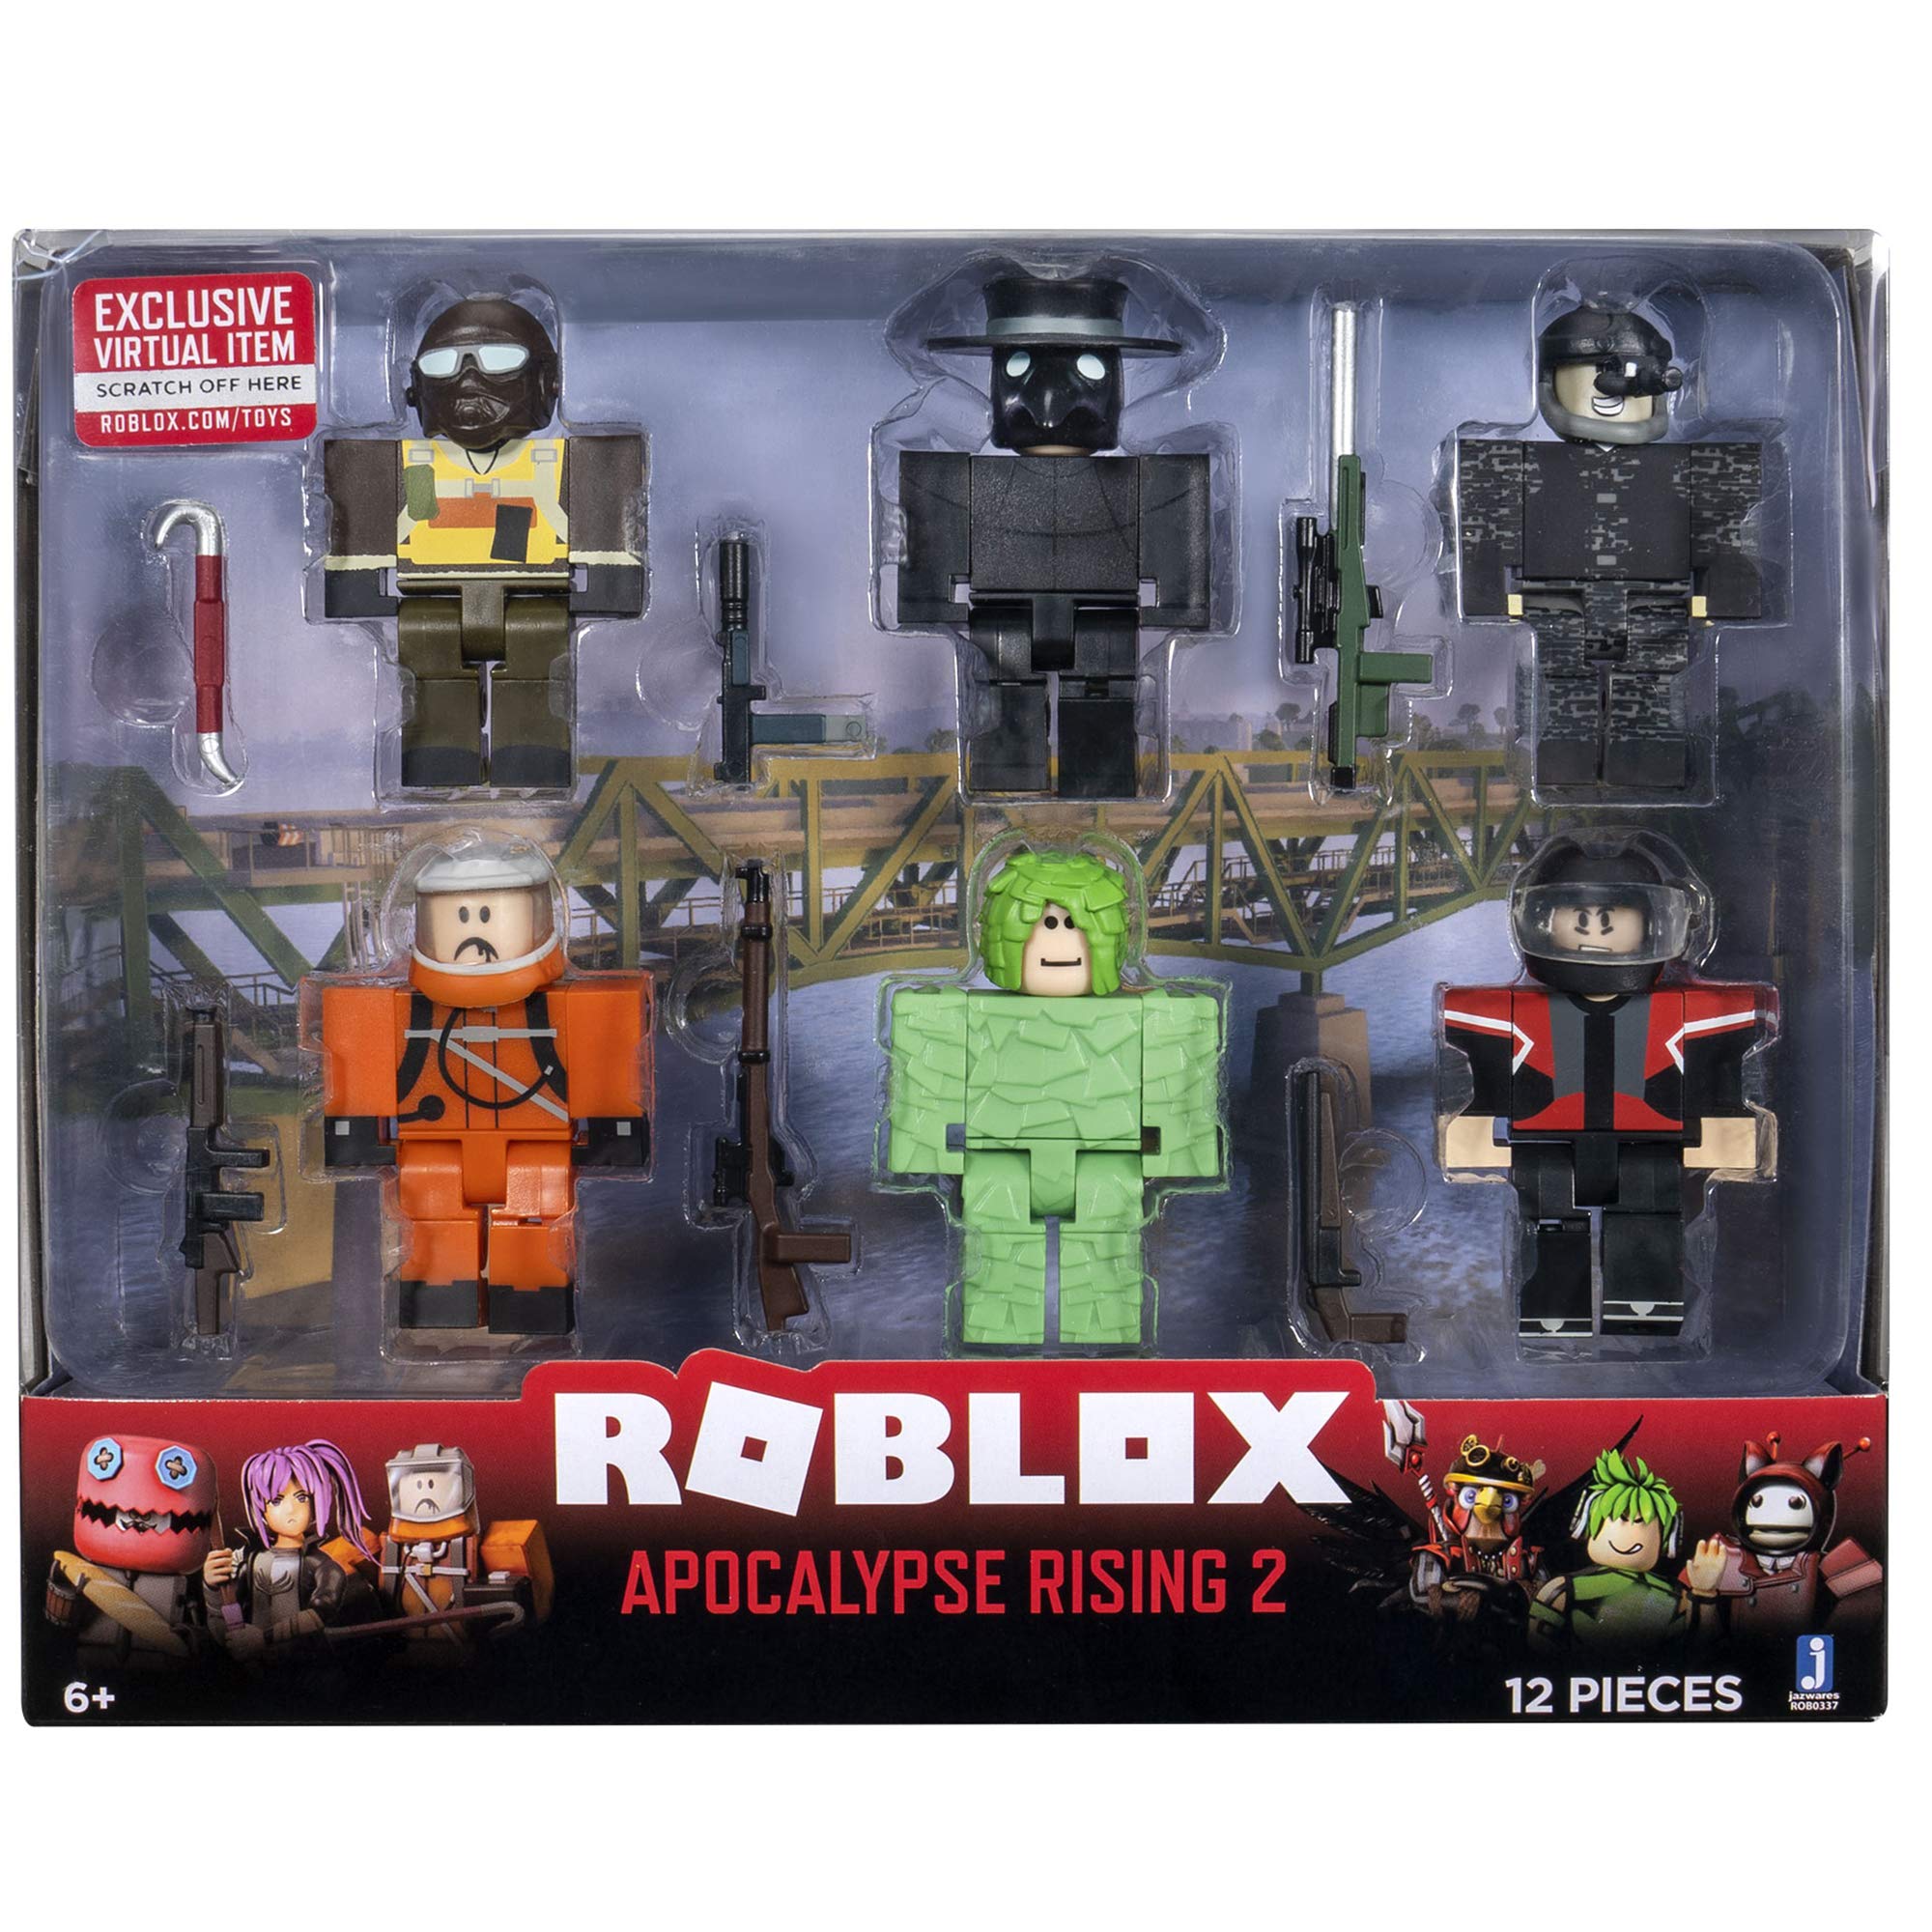 Roblox Action Collection - Legends of Roblox Six Figure Character Pack  [Includes Exclusive Virtual Item] 